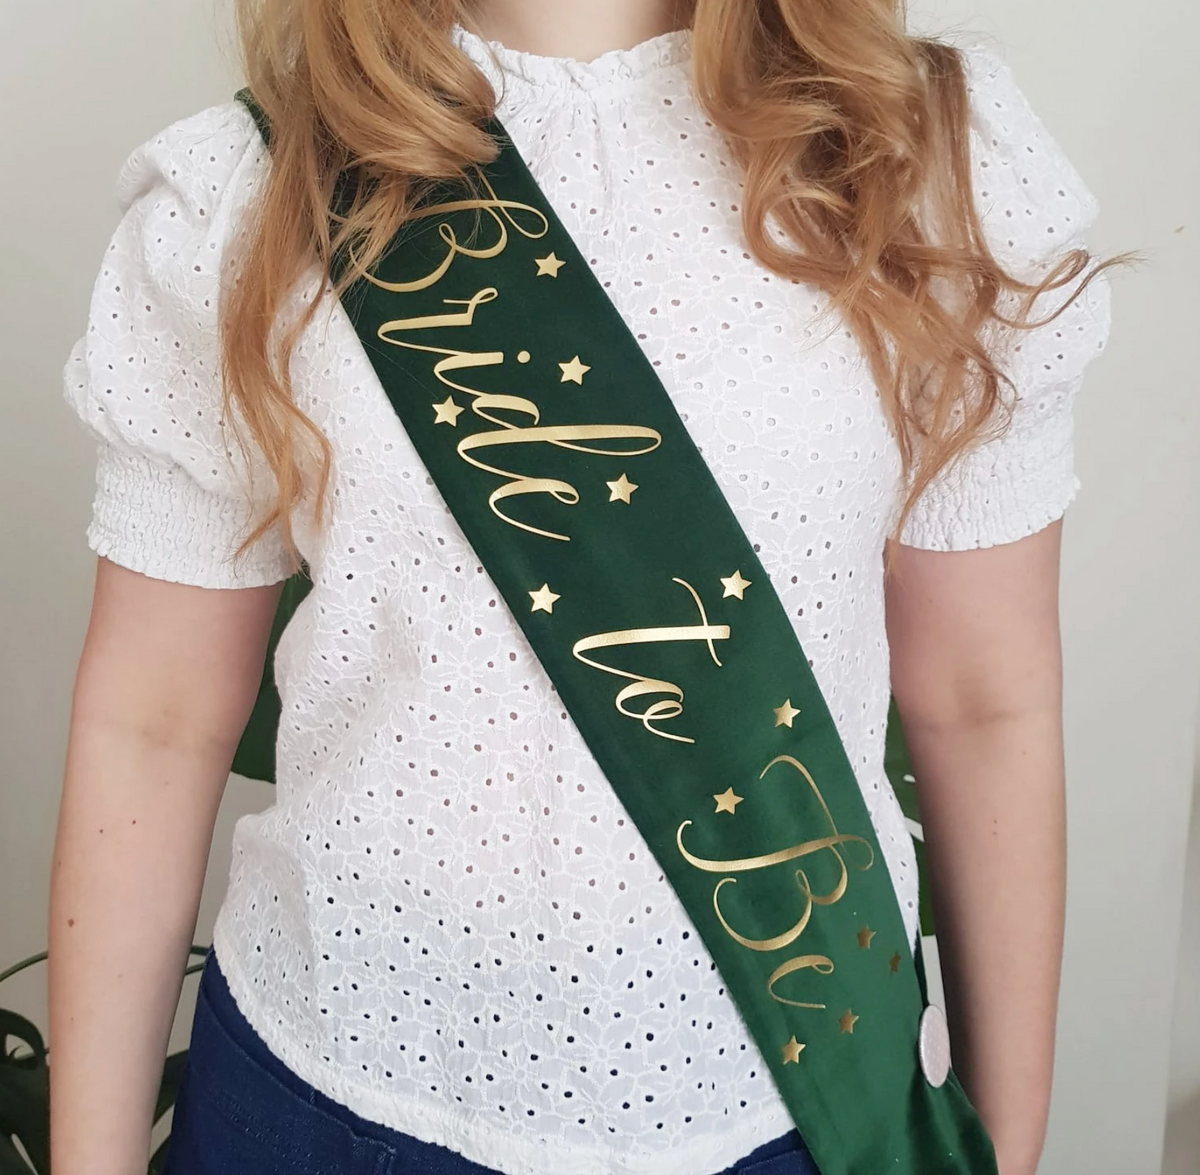 Green Velvet Hen Party Sash - Personalisation available